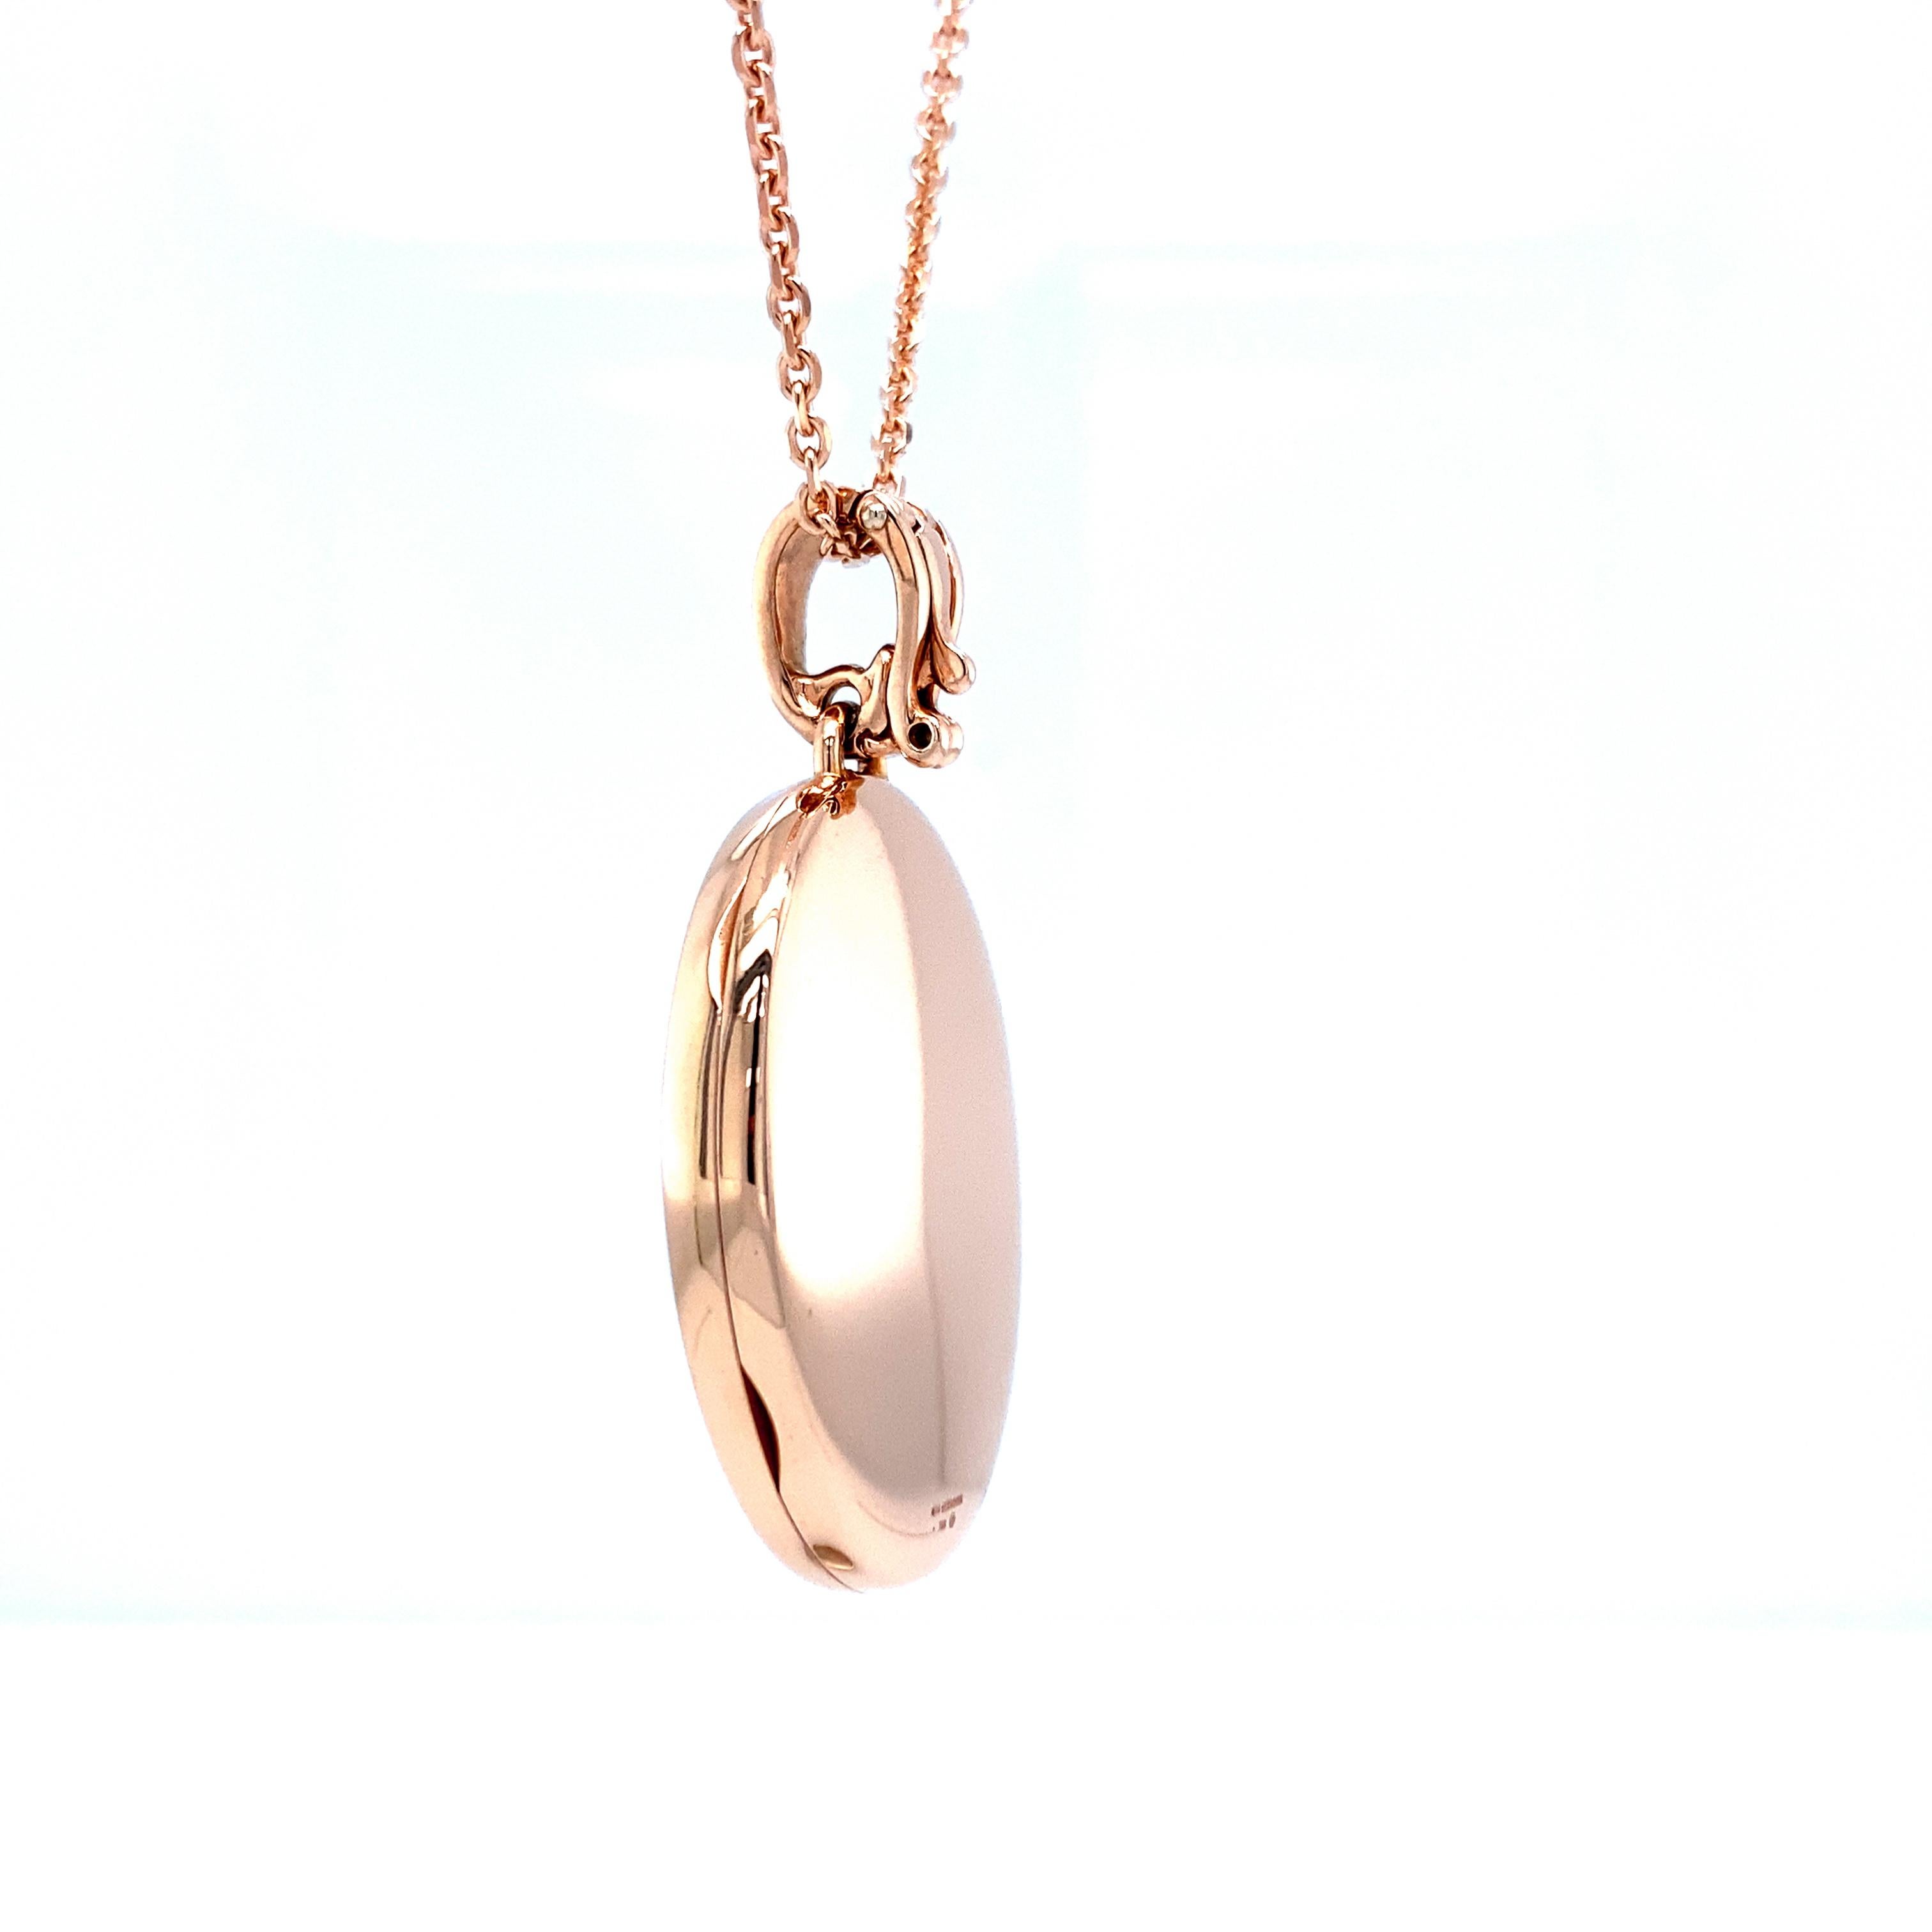 Oval Ornamented Pendant Locket Necklace 18k Rose Gold 2 Diamonds Pink Tourmaline In New Condition For Sale In Pforzheim, DE